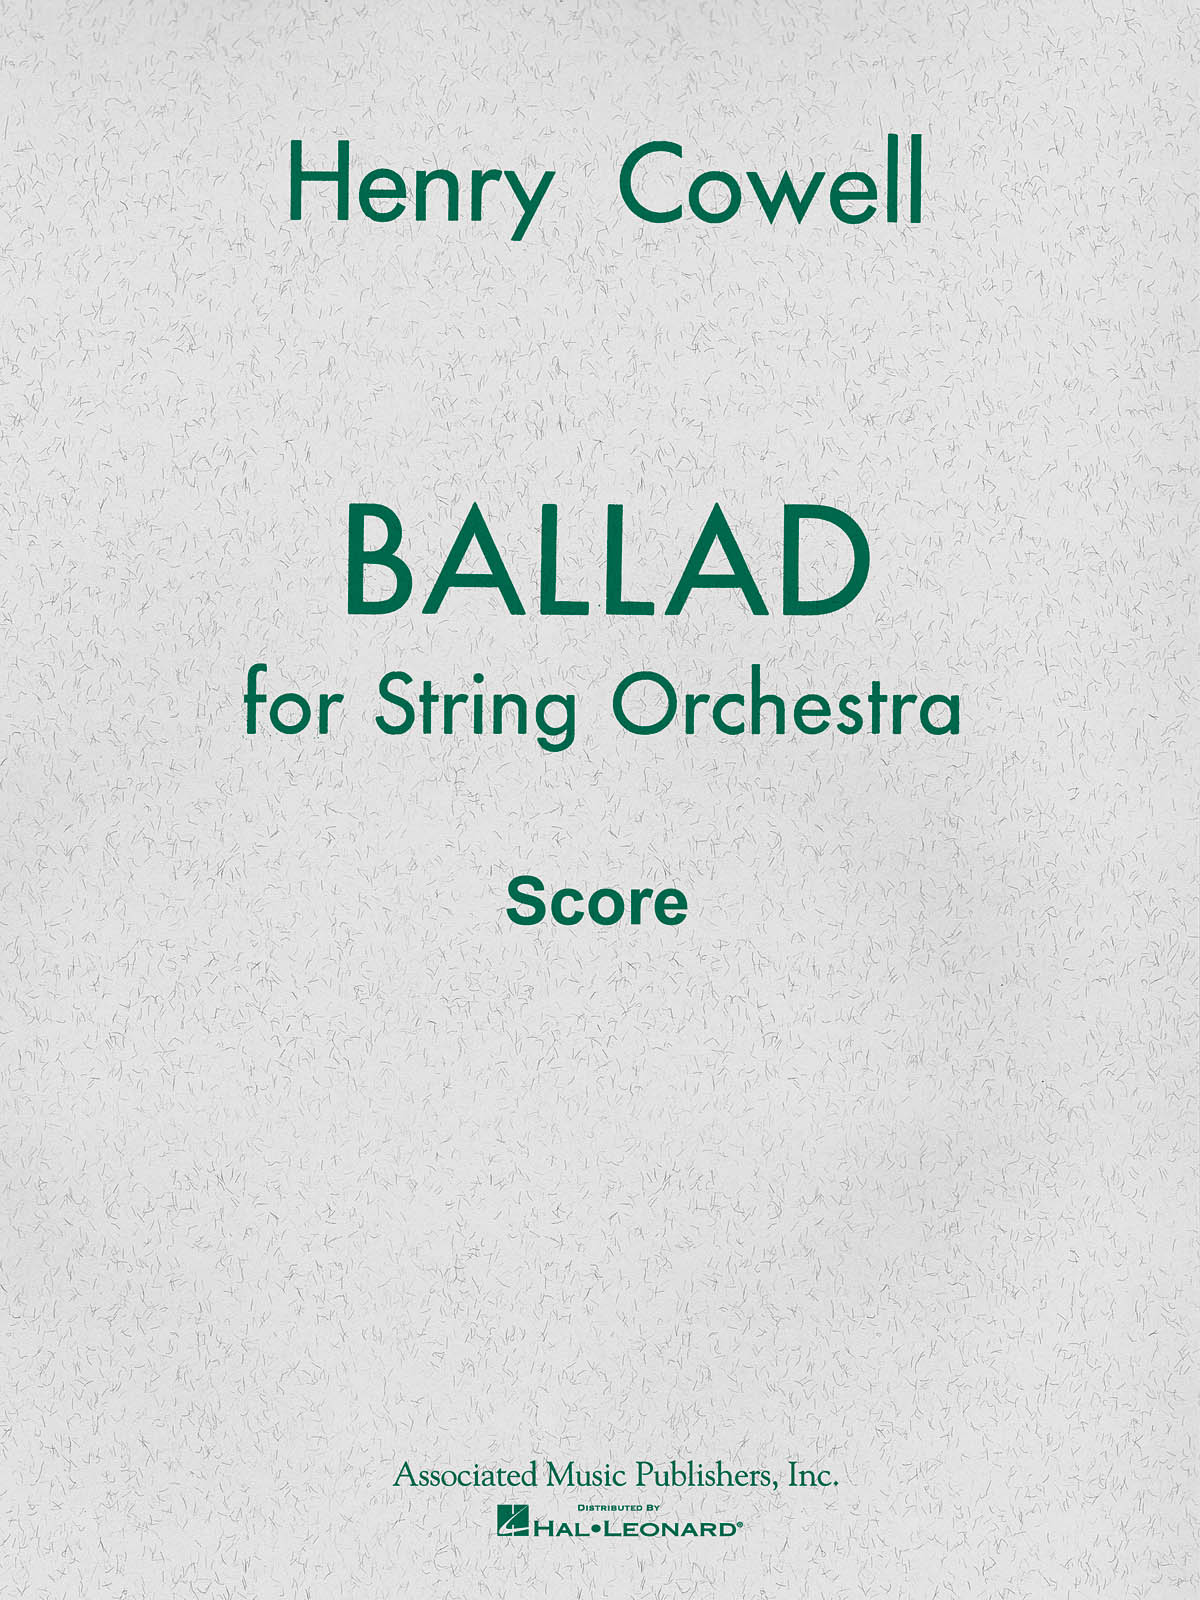 Henry Cowell: Ballad (1954) for String Orchestra: Orchestra: Score